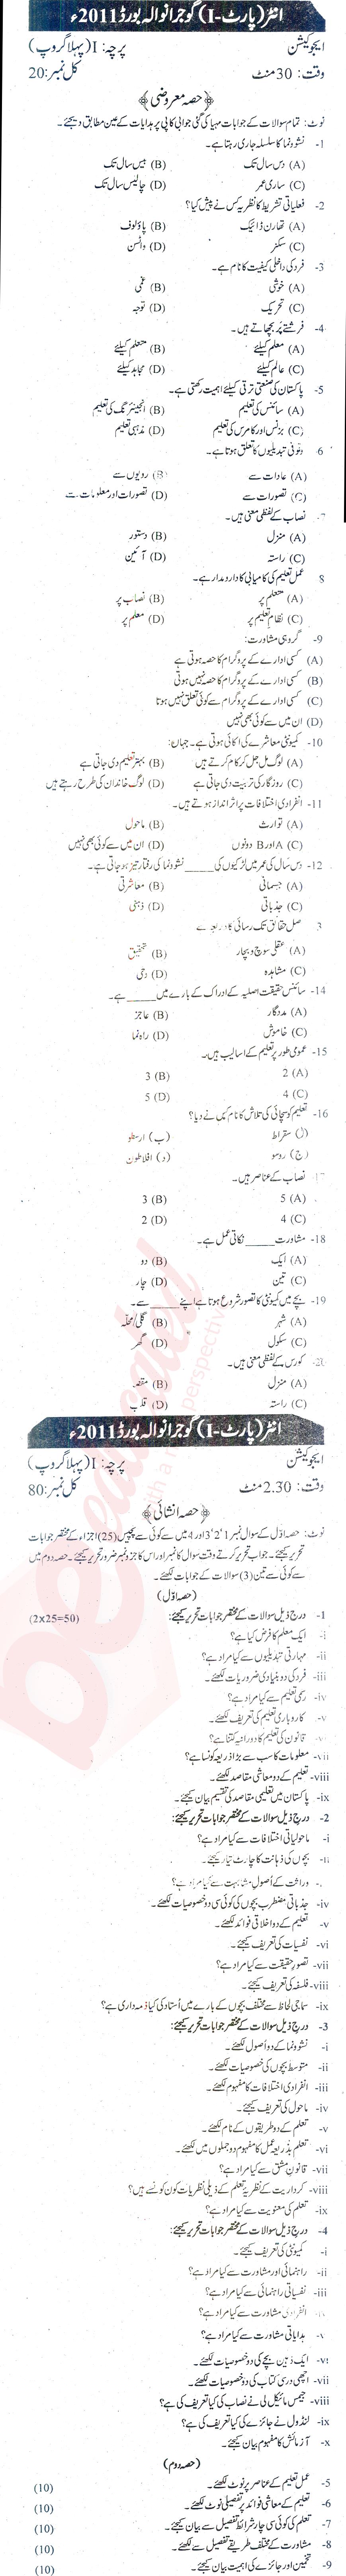 Education FA Part 1 Past Paper Group 1 BISE Gujranwala 2011